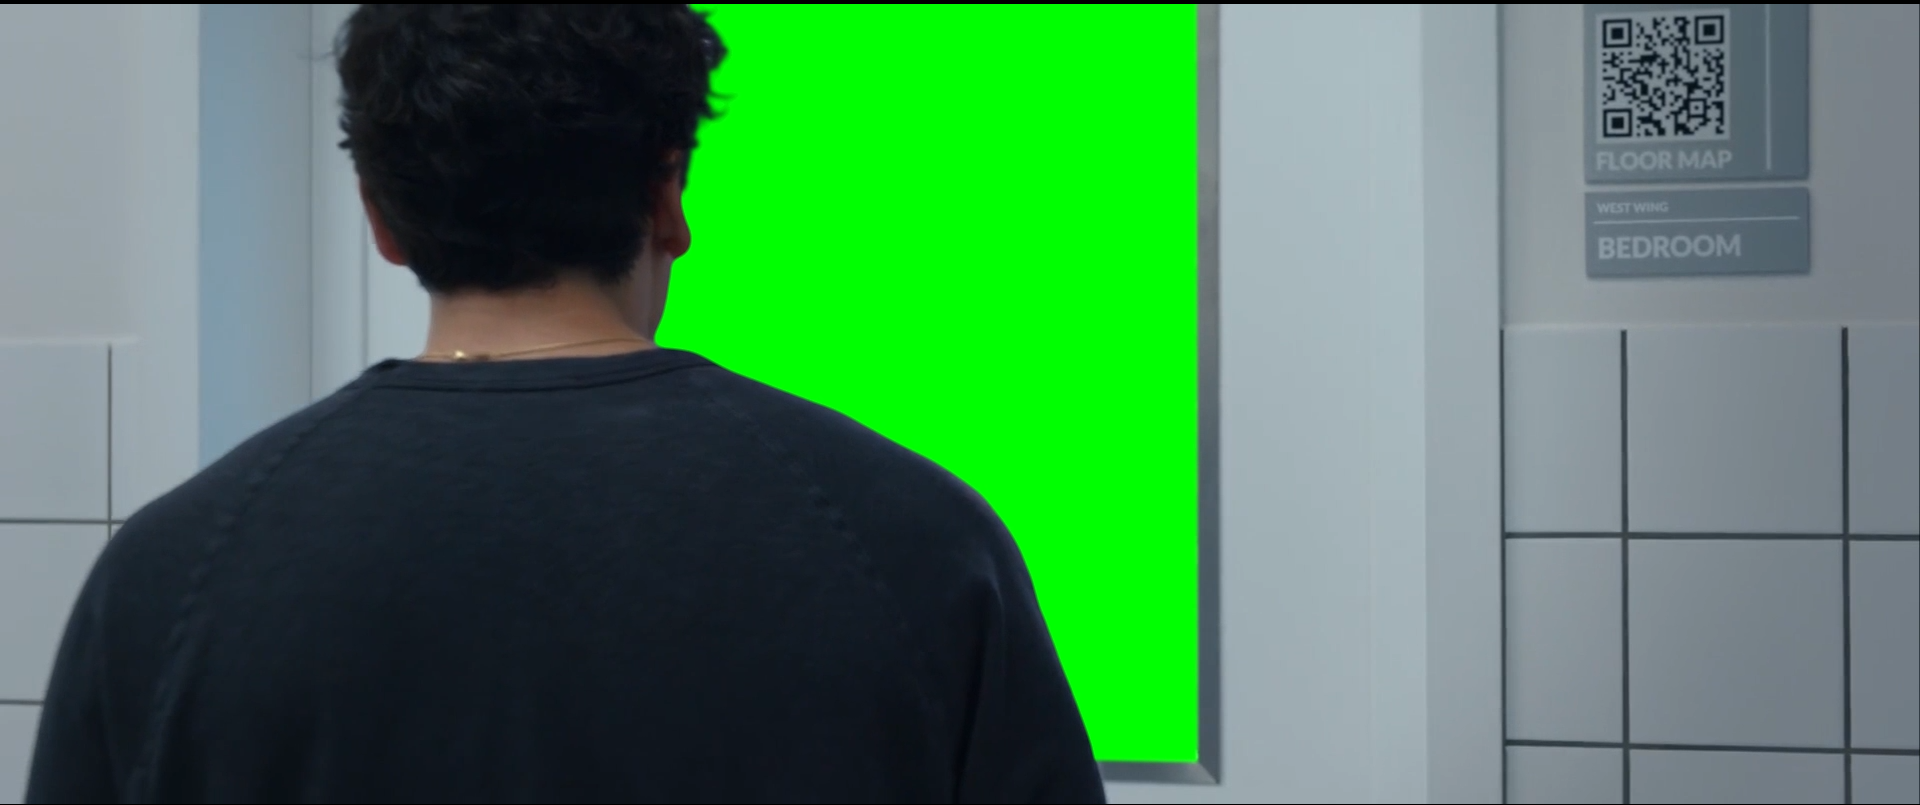 Steven and Marc looking back at their memories meme - Moon Knight (Green Screen)